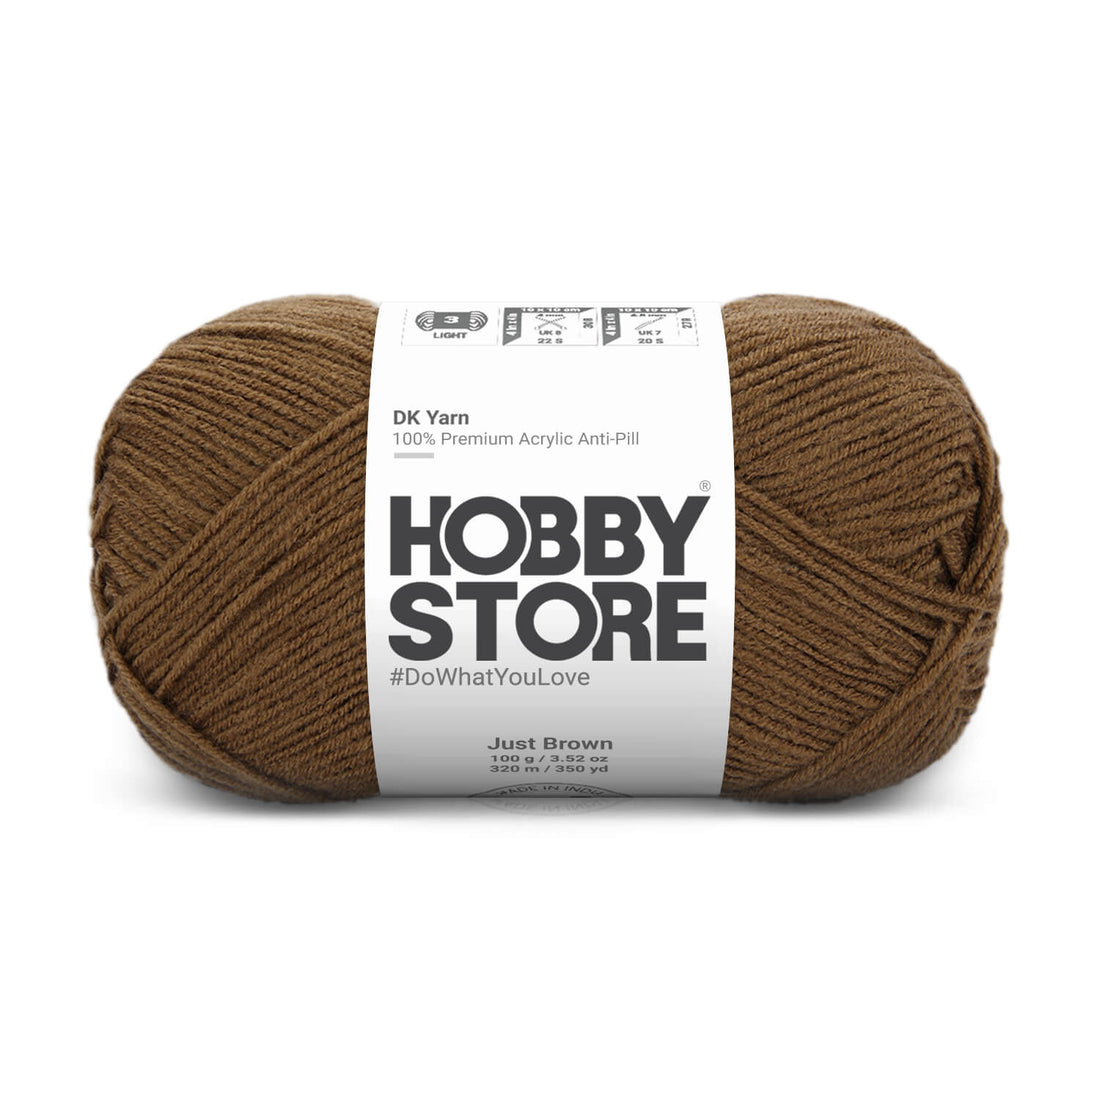 DK Anti-Pill Yarn by Hobby Store - Just Brown 5020